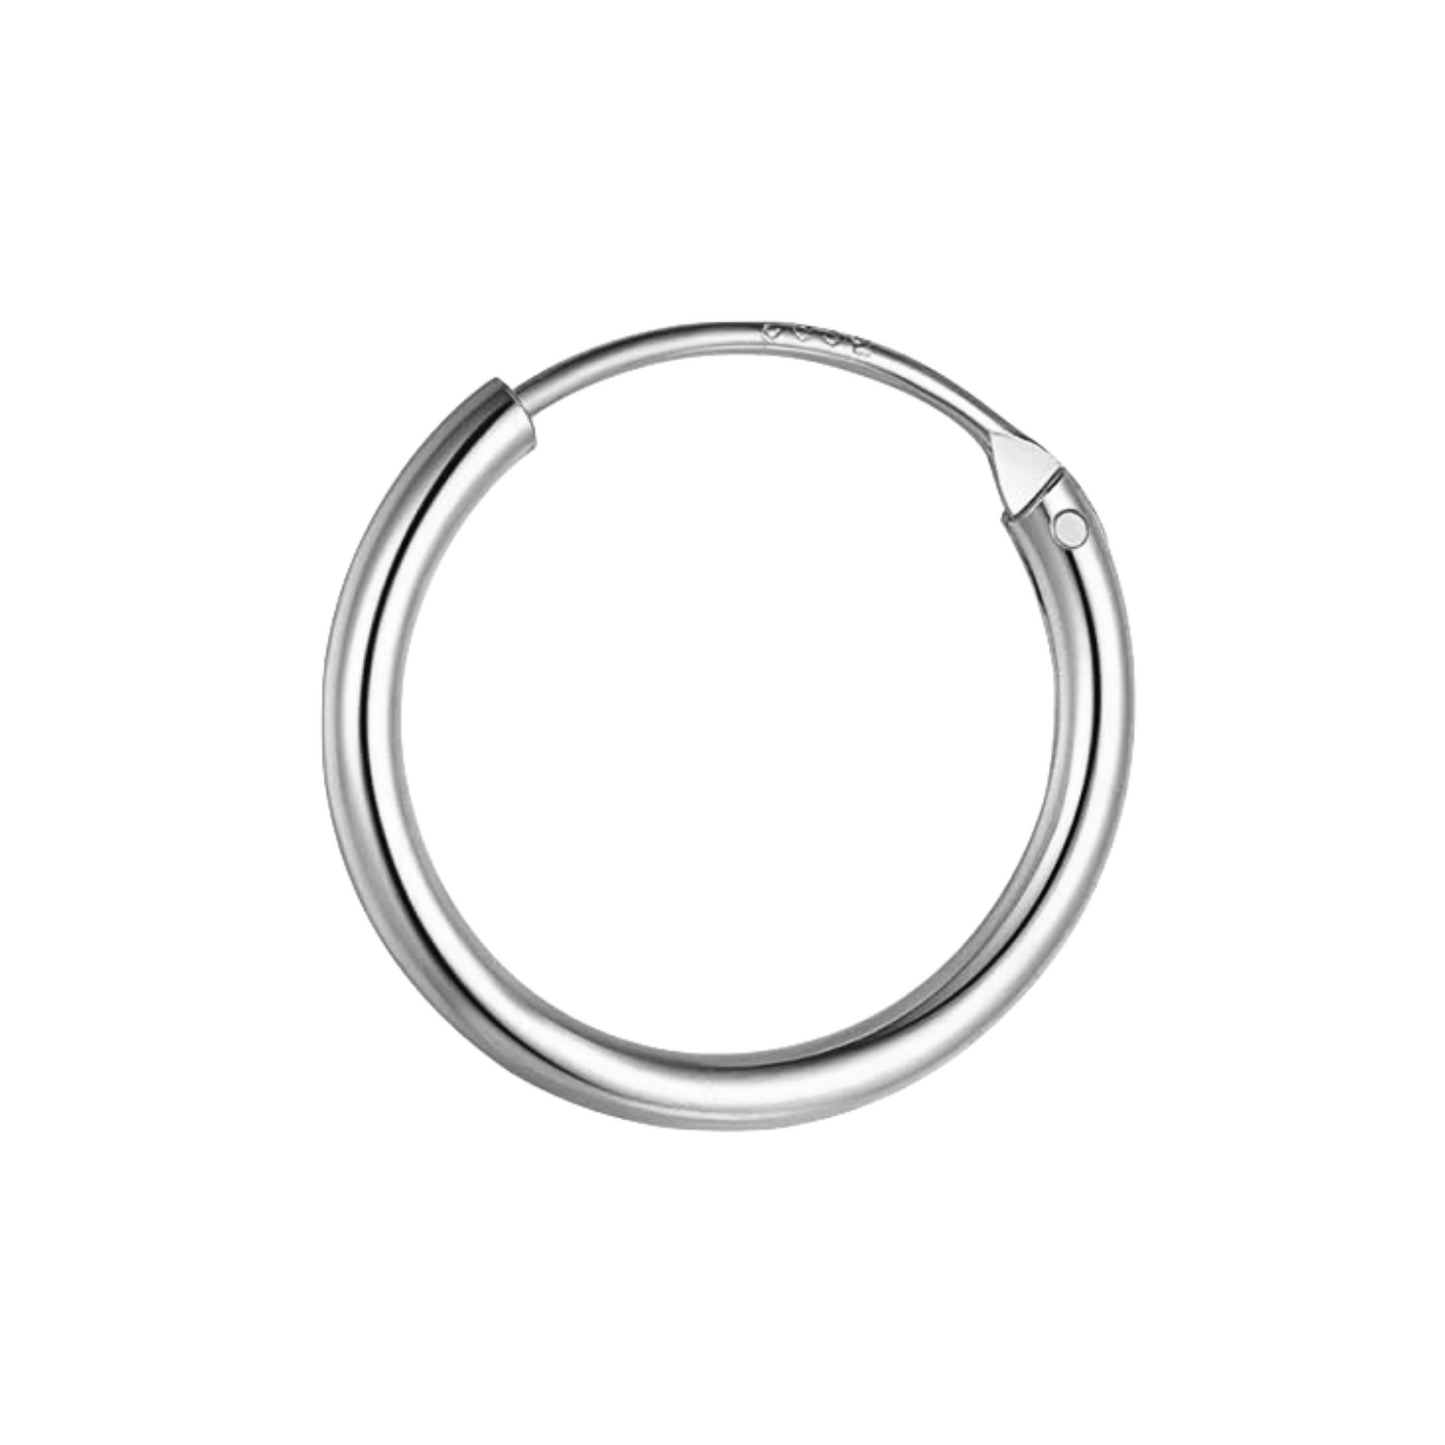 Mens Classic Hoop Earrings in 92.5 Sterling Silver - 1.2mm Thickness - Small Sizes 10mm to 20mm (Thin & lightweight Hoops)